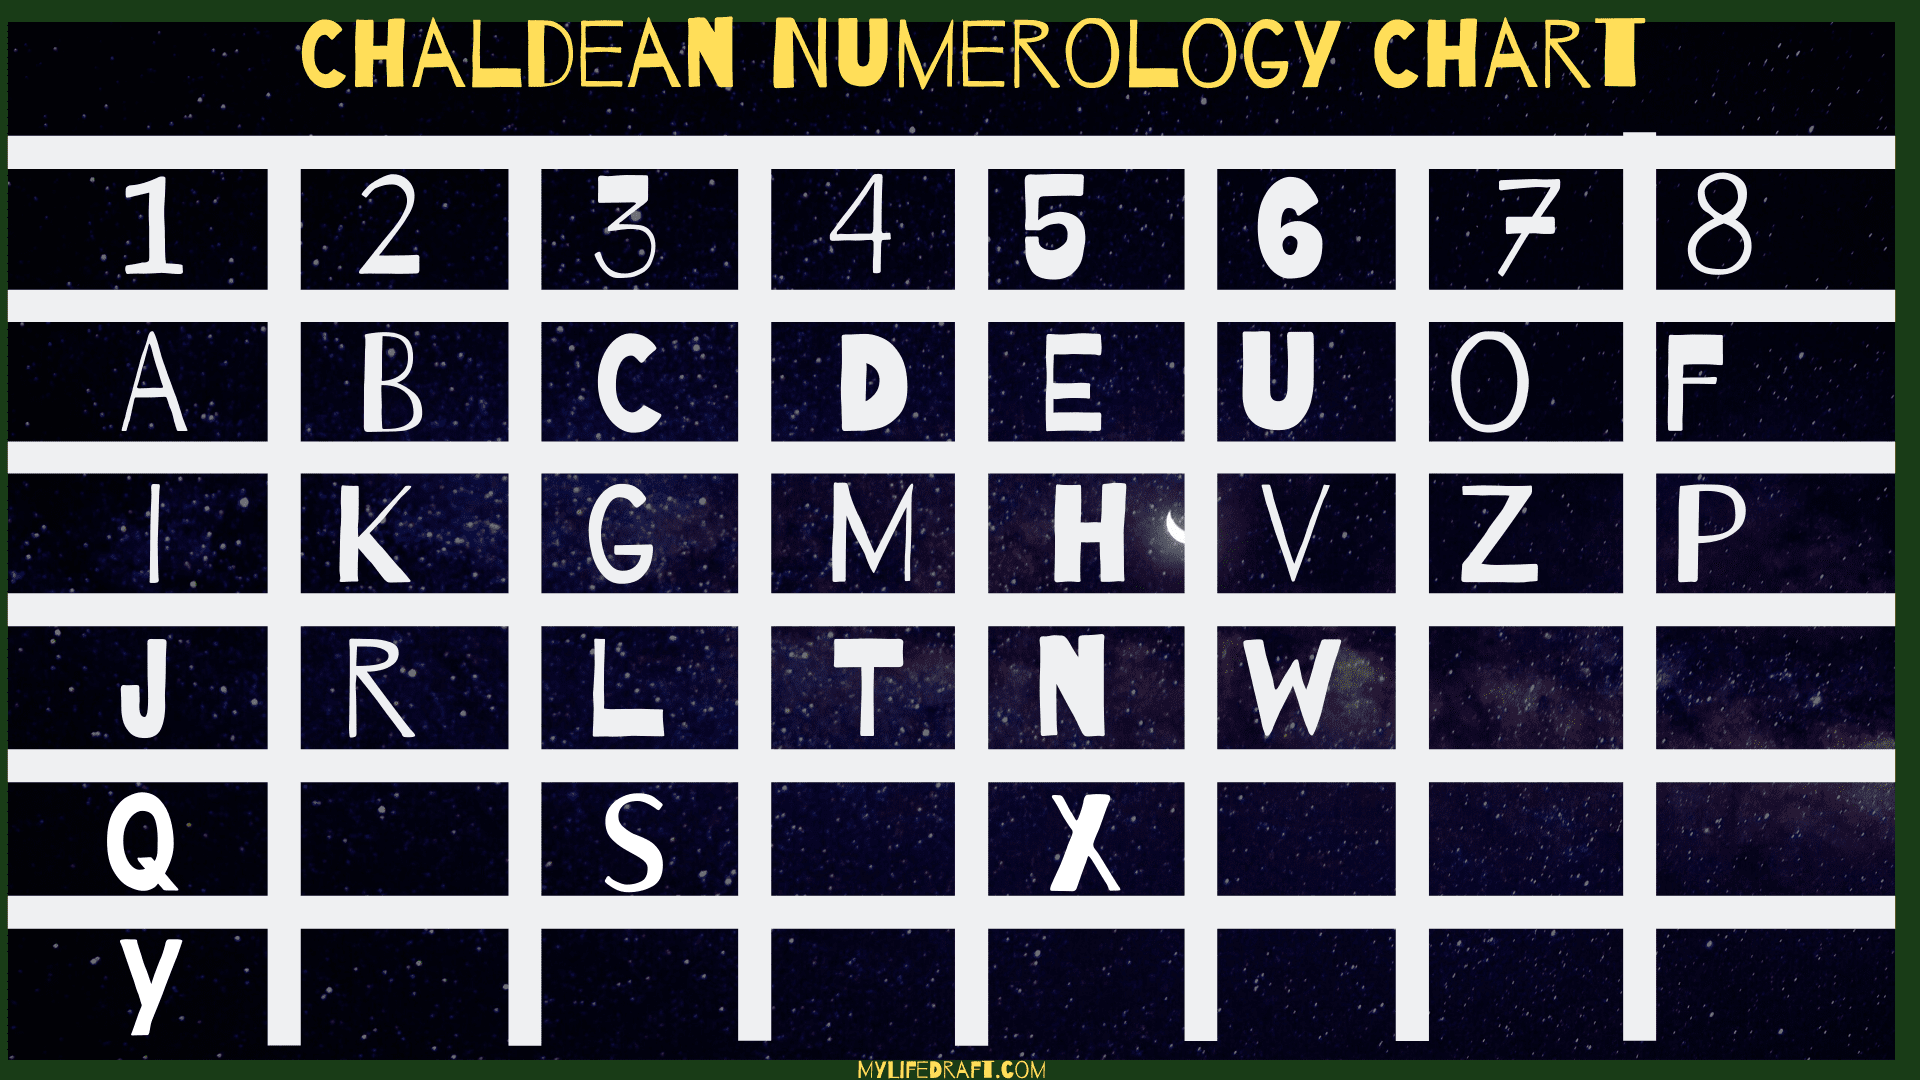 numerology-chart-and-meaning-in-today-s-world-mylifedraft